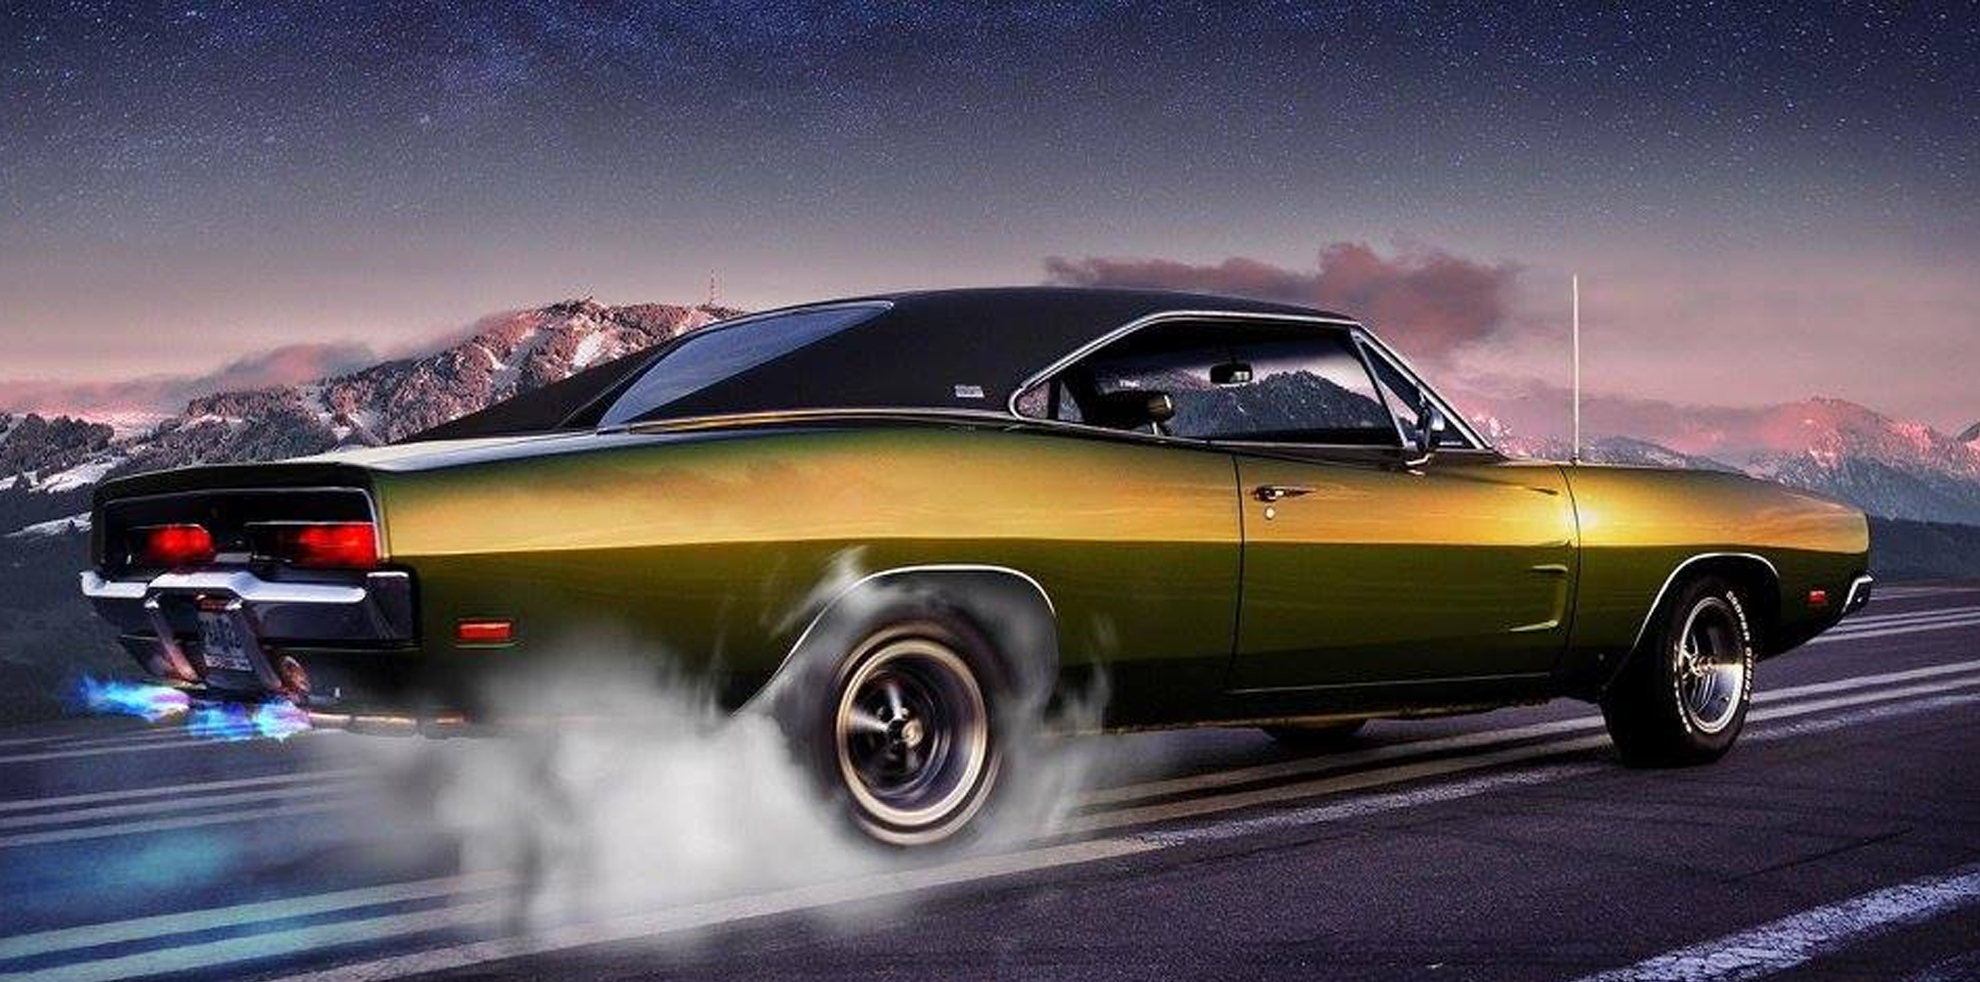 Dodge Mopar Plymouth Reproduction Parts - Cuda Challenger Charger 